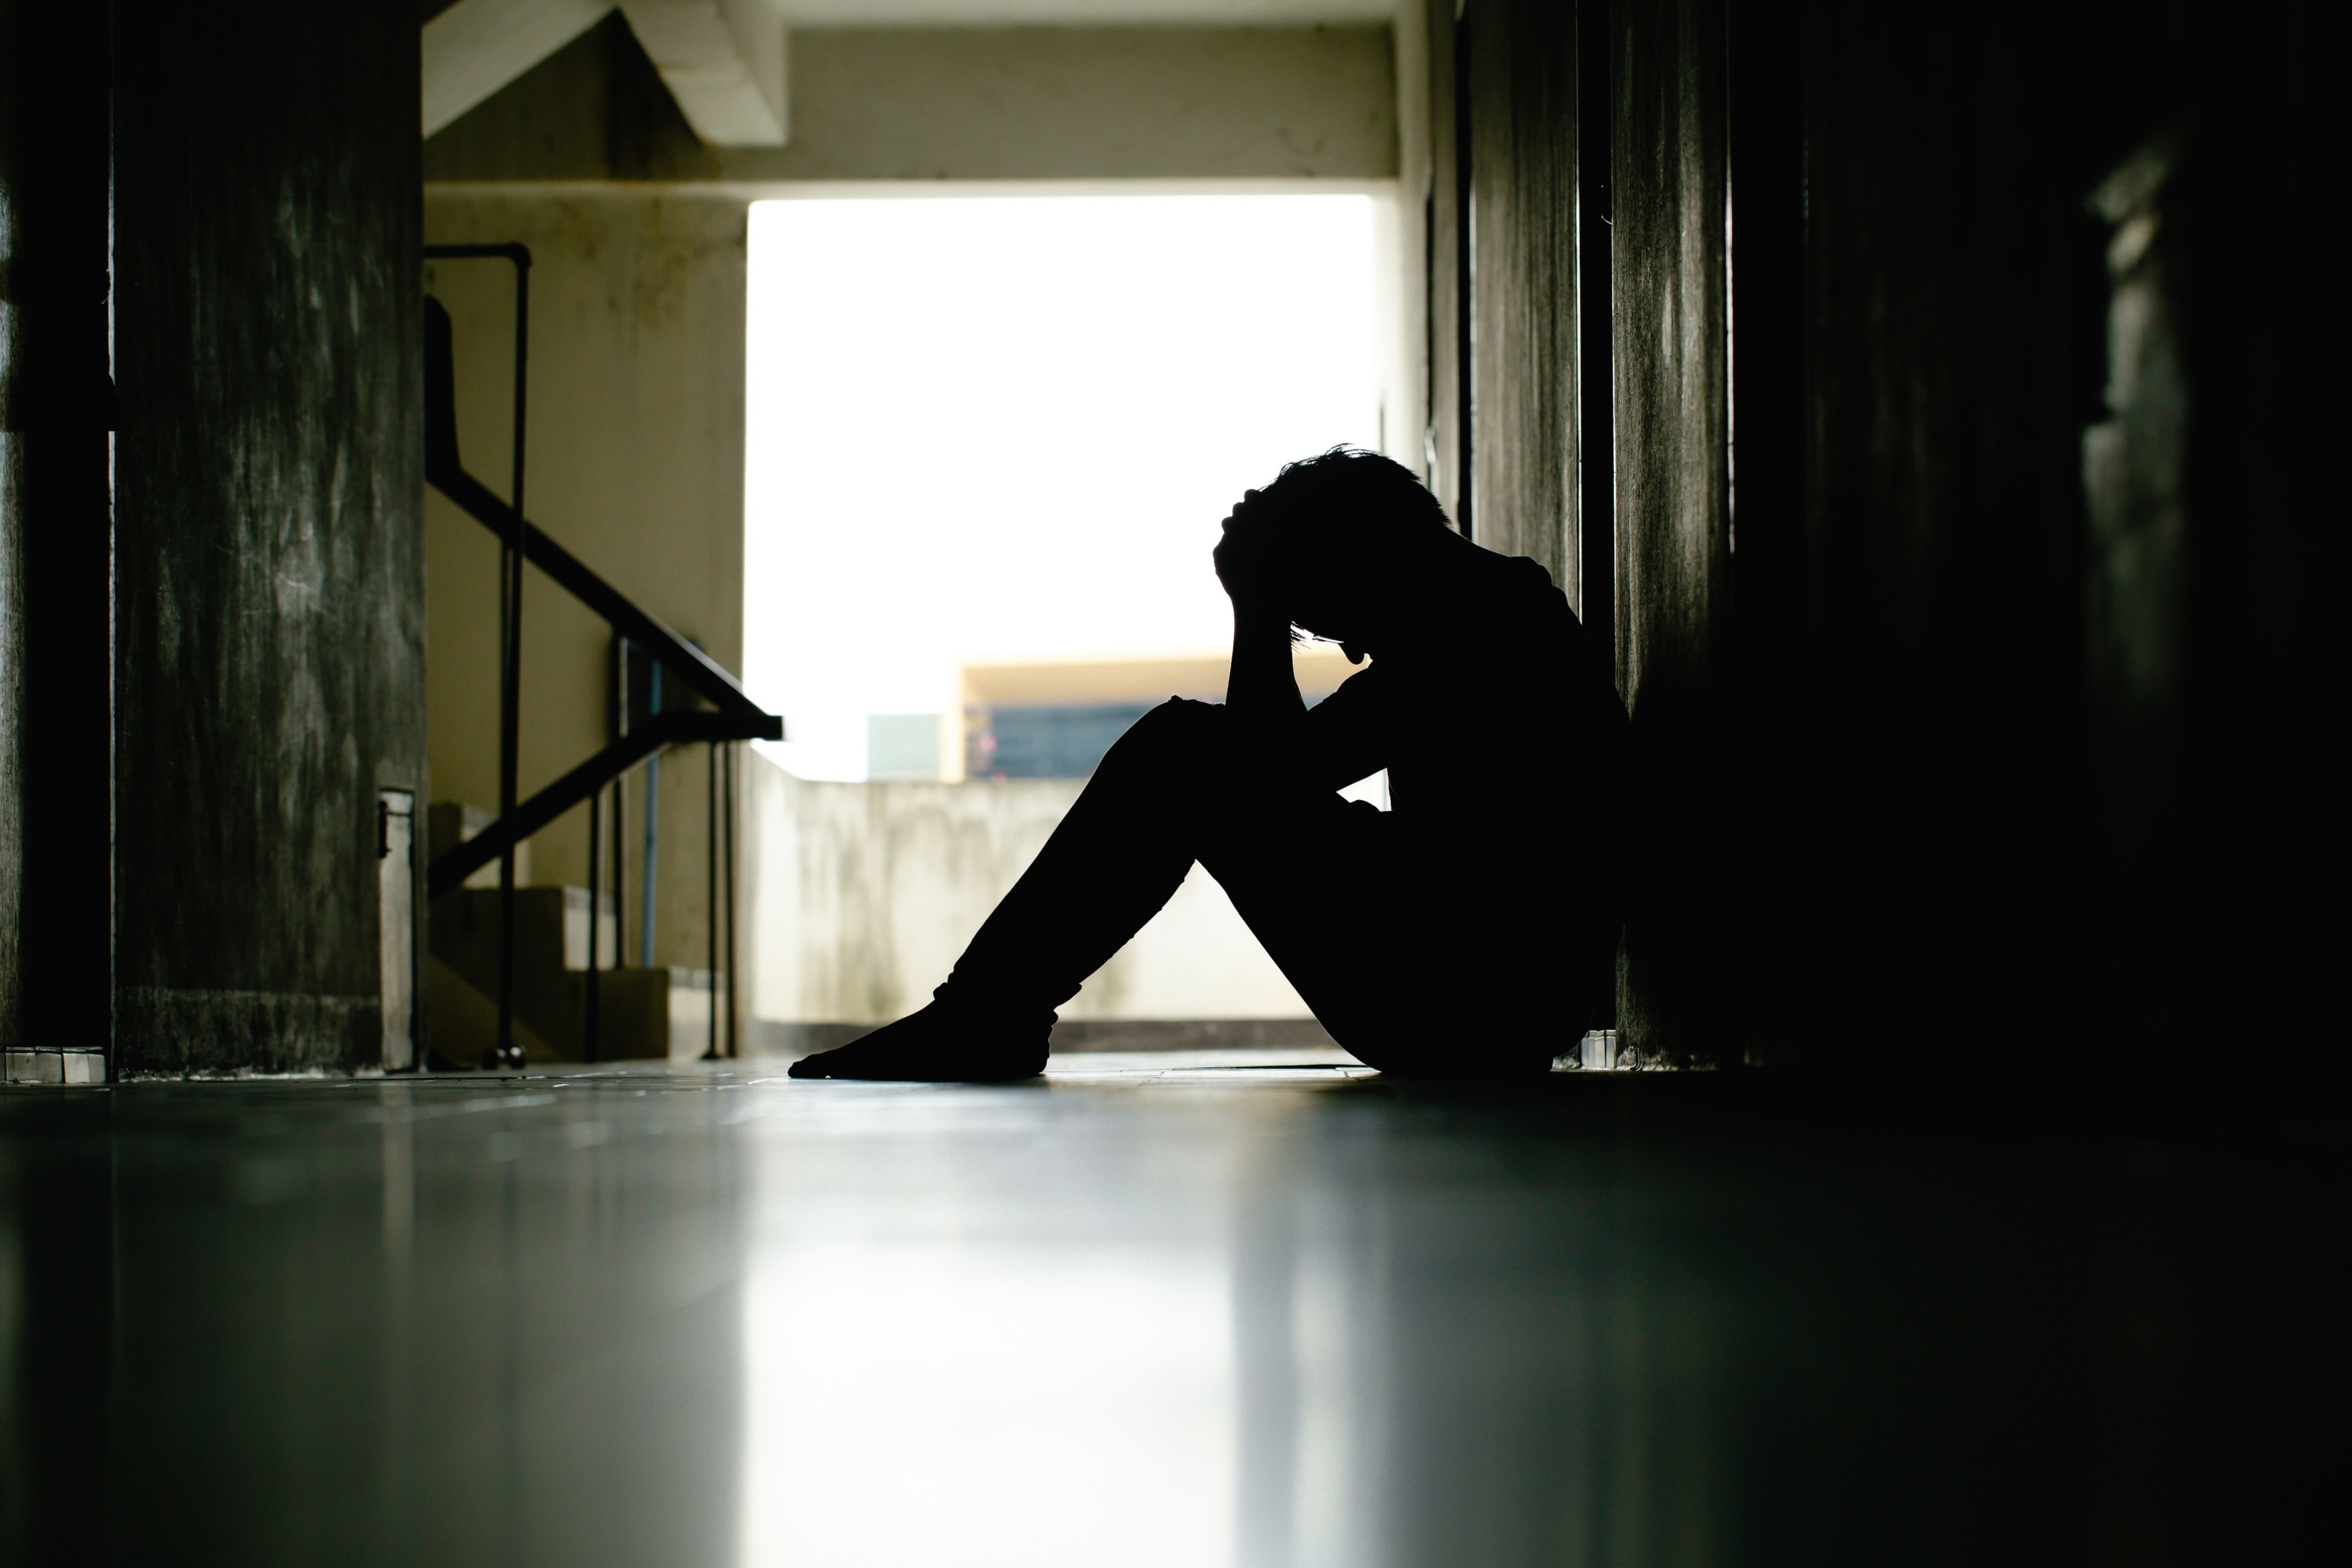 Hong Kong’s Education Bureau will give each local primary and secondary school HK$80,000 to promote student mental health amid a worrying rise in teen suicides. Photo: Shutterstock